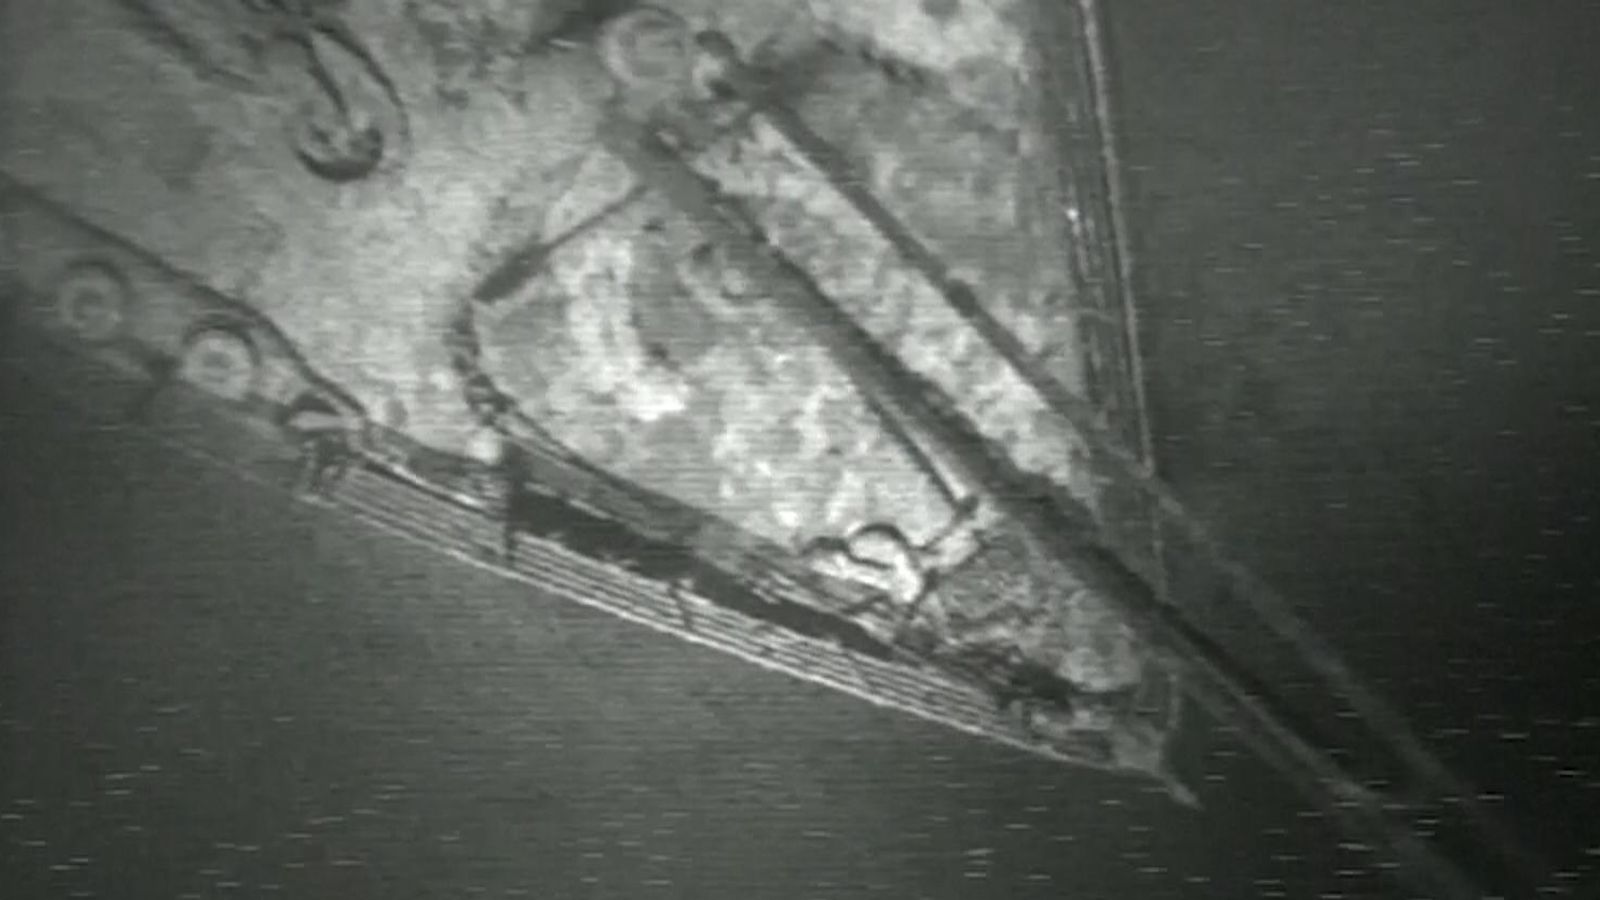 Titanic Ship wreck never seen footage released after 35 years